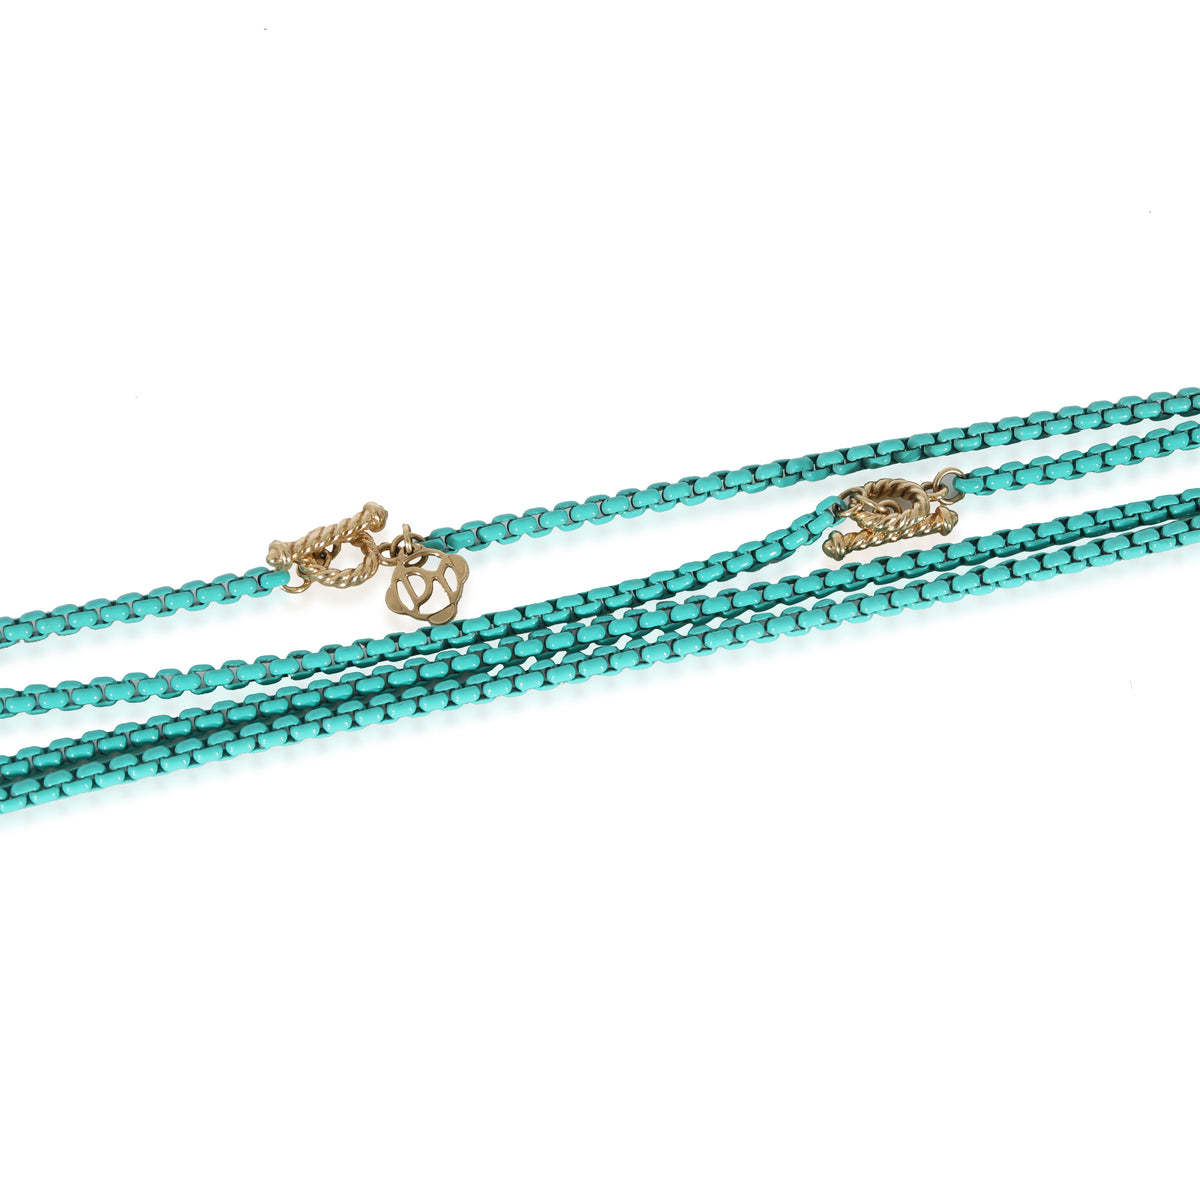 David Yurman Bel Aire Chain Necklace in Turquoise in 14KT Yellow Gold/Steel